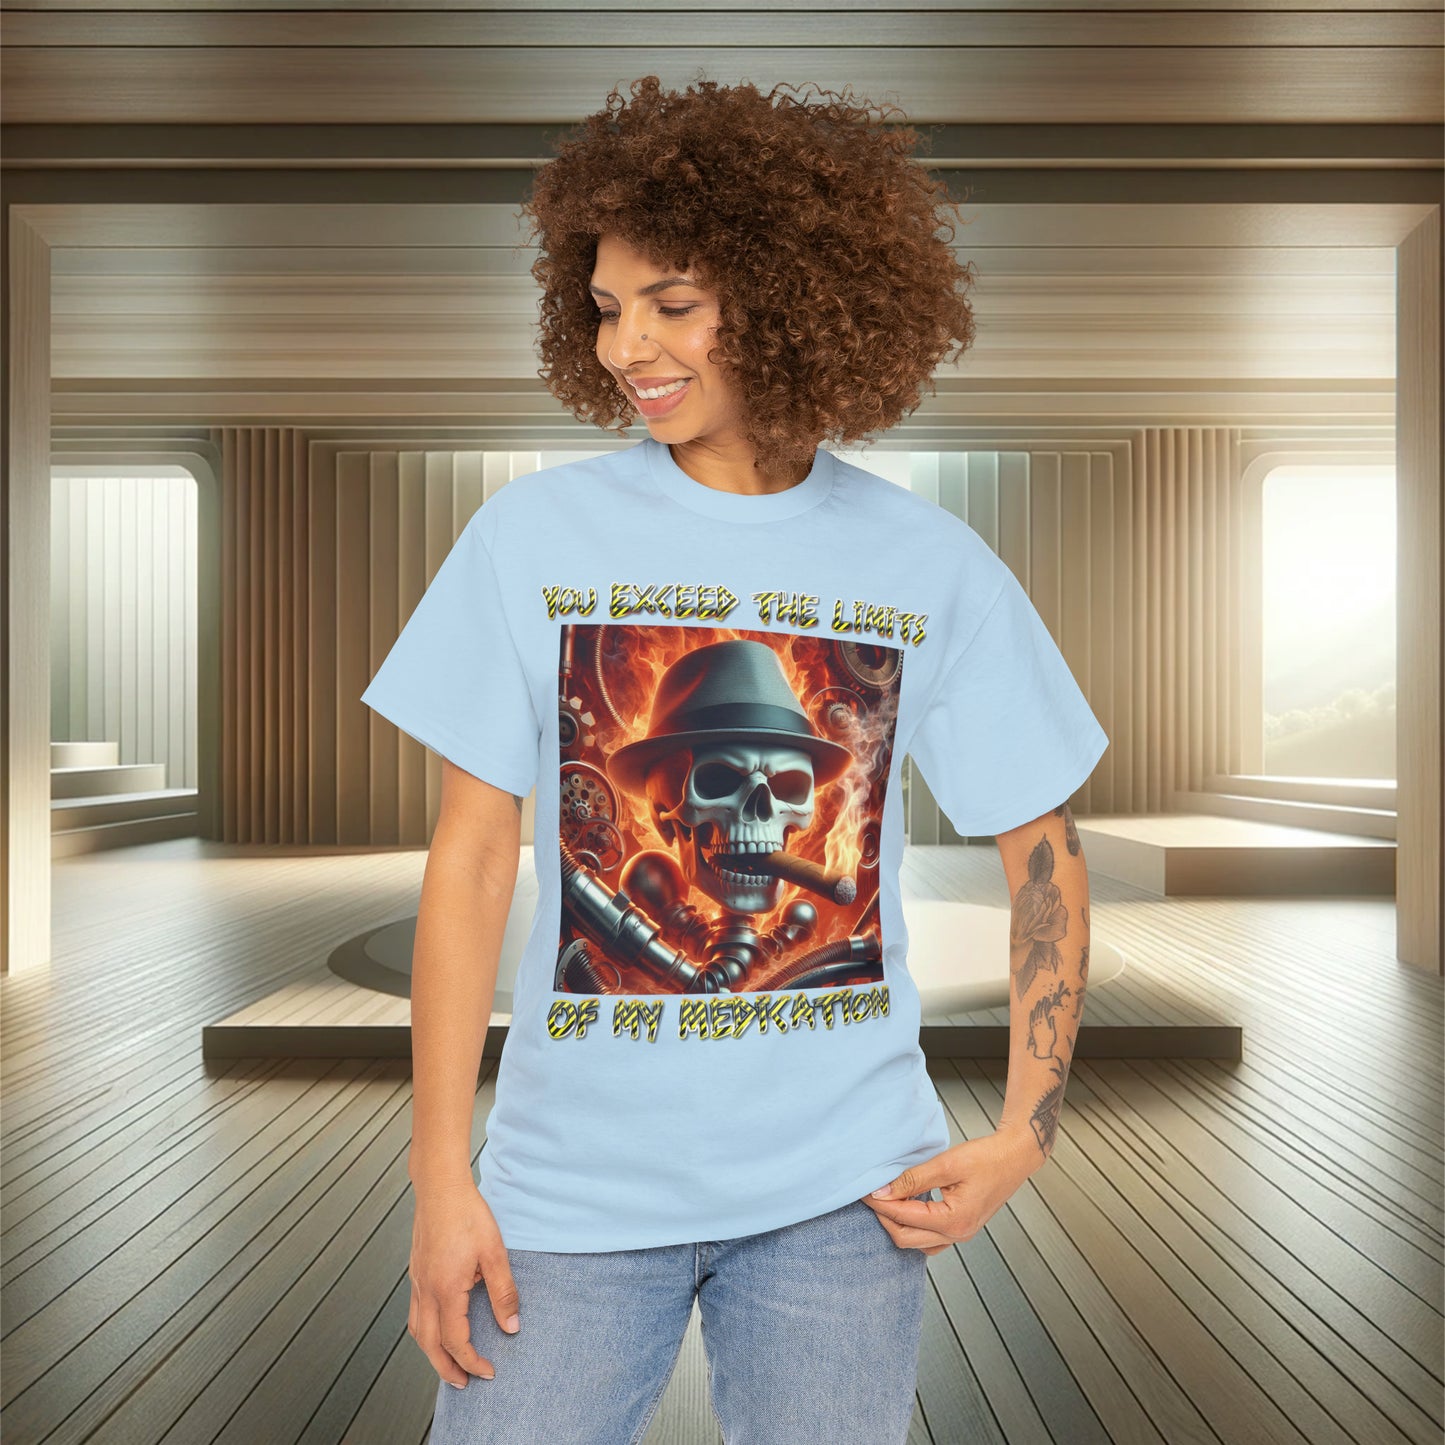 You exceed the Limits of My Medication. Shirt